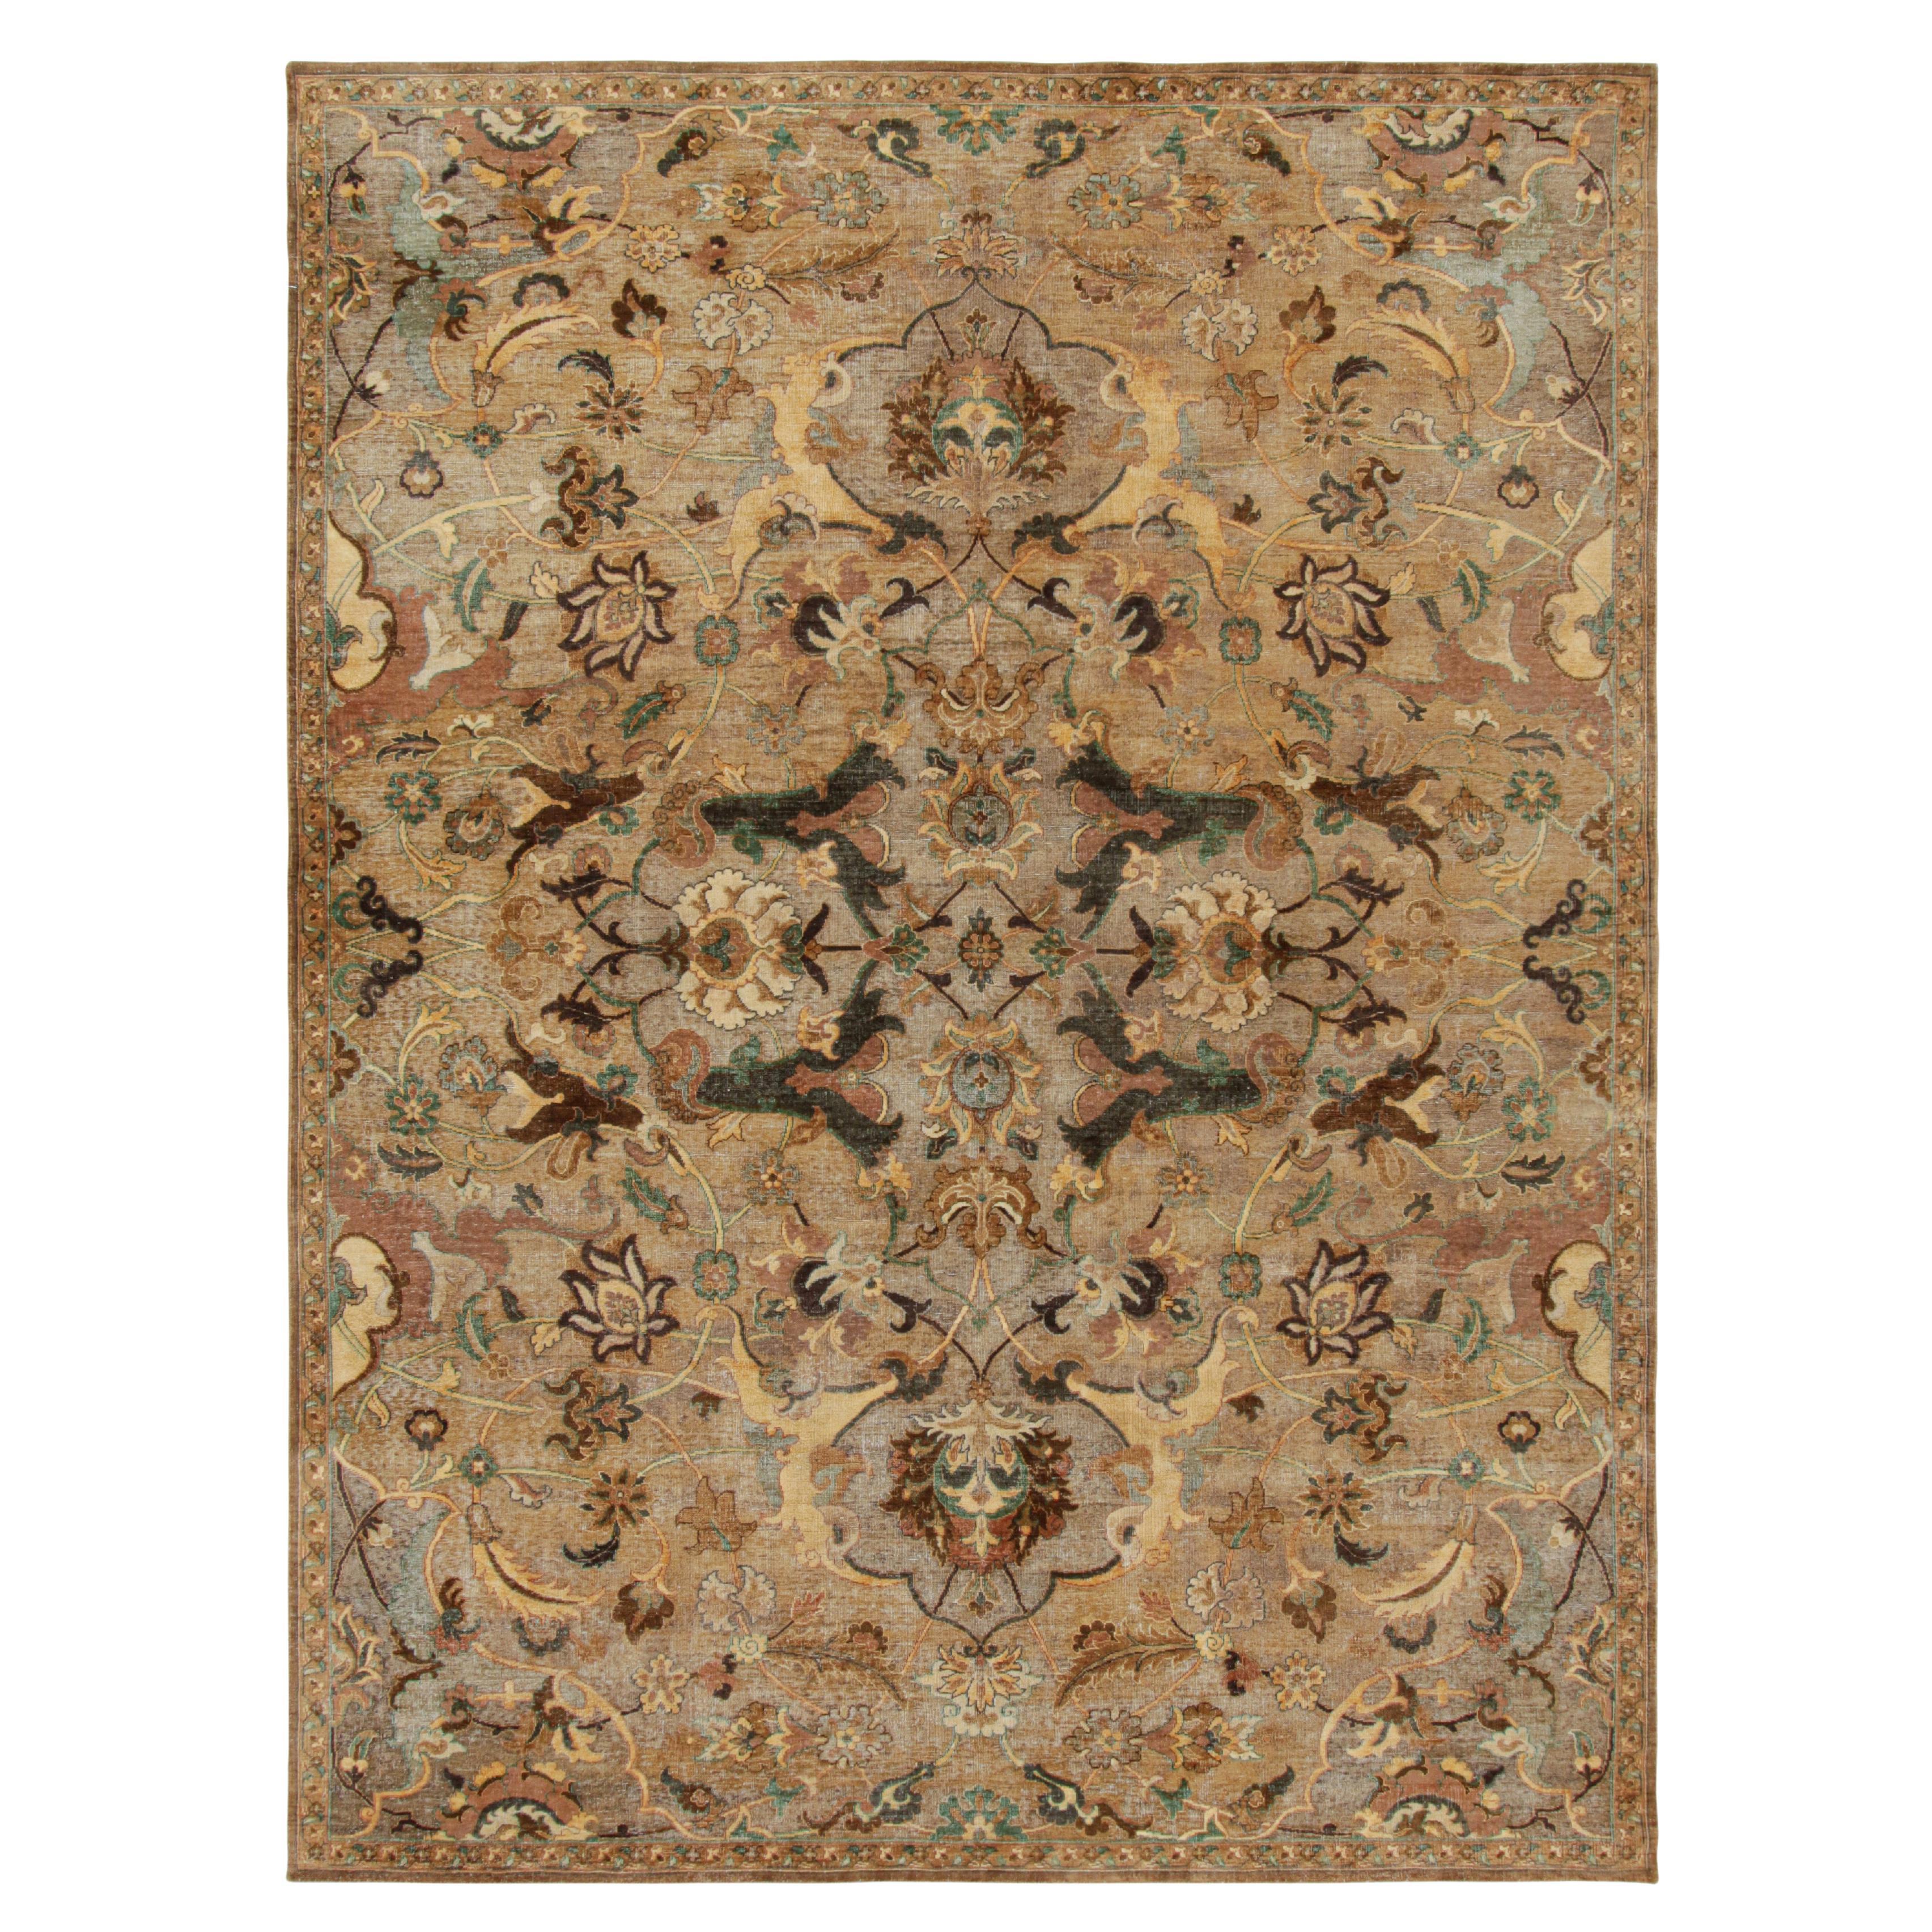 Rug & Kilim’s Polonaise Style Rug in Beige-Brown with Floral Patterns For Sale